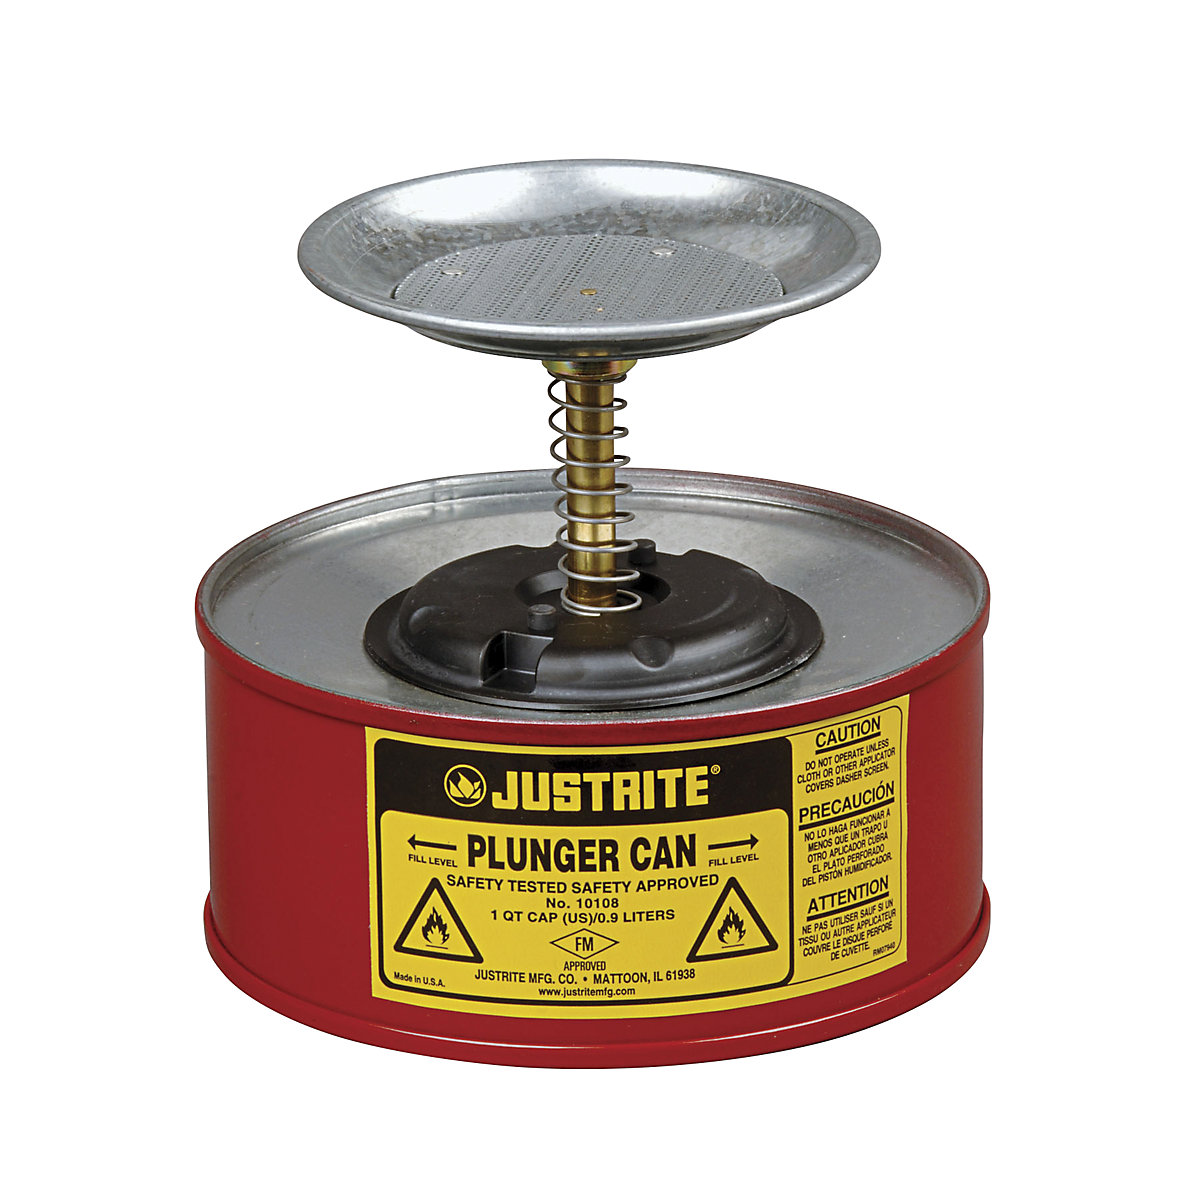 Plunger can – Justrite